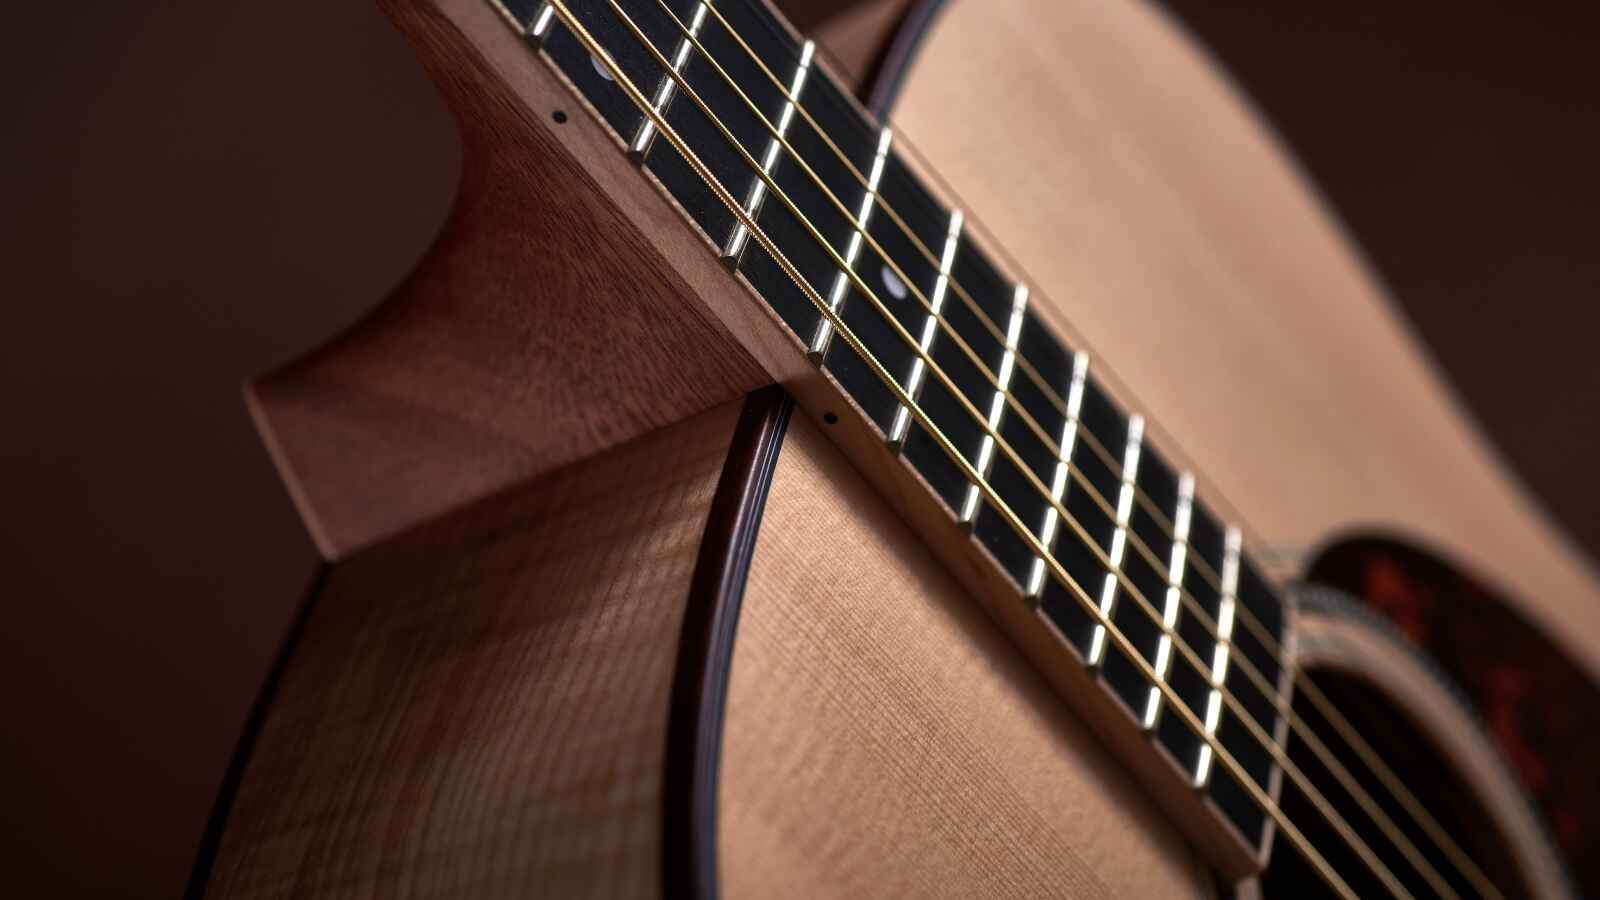 What Are The Best Strings For An Acoustic Guitar?